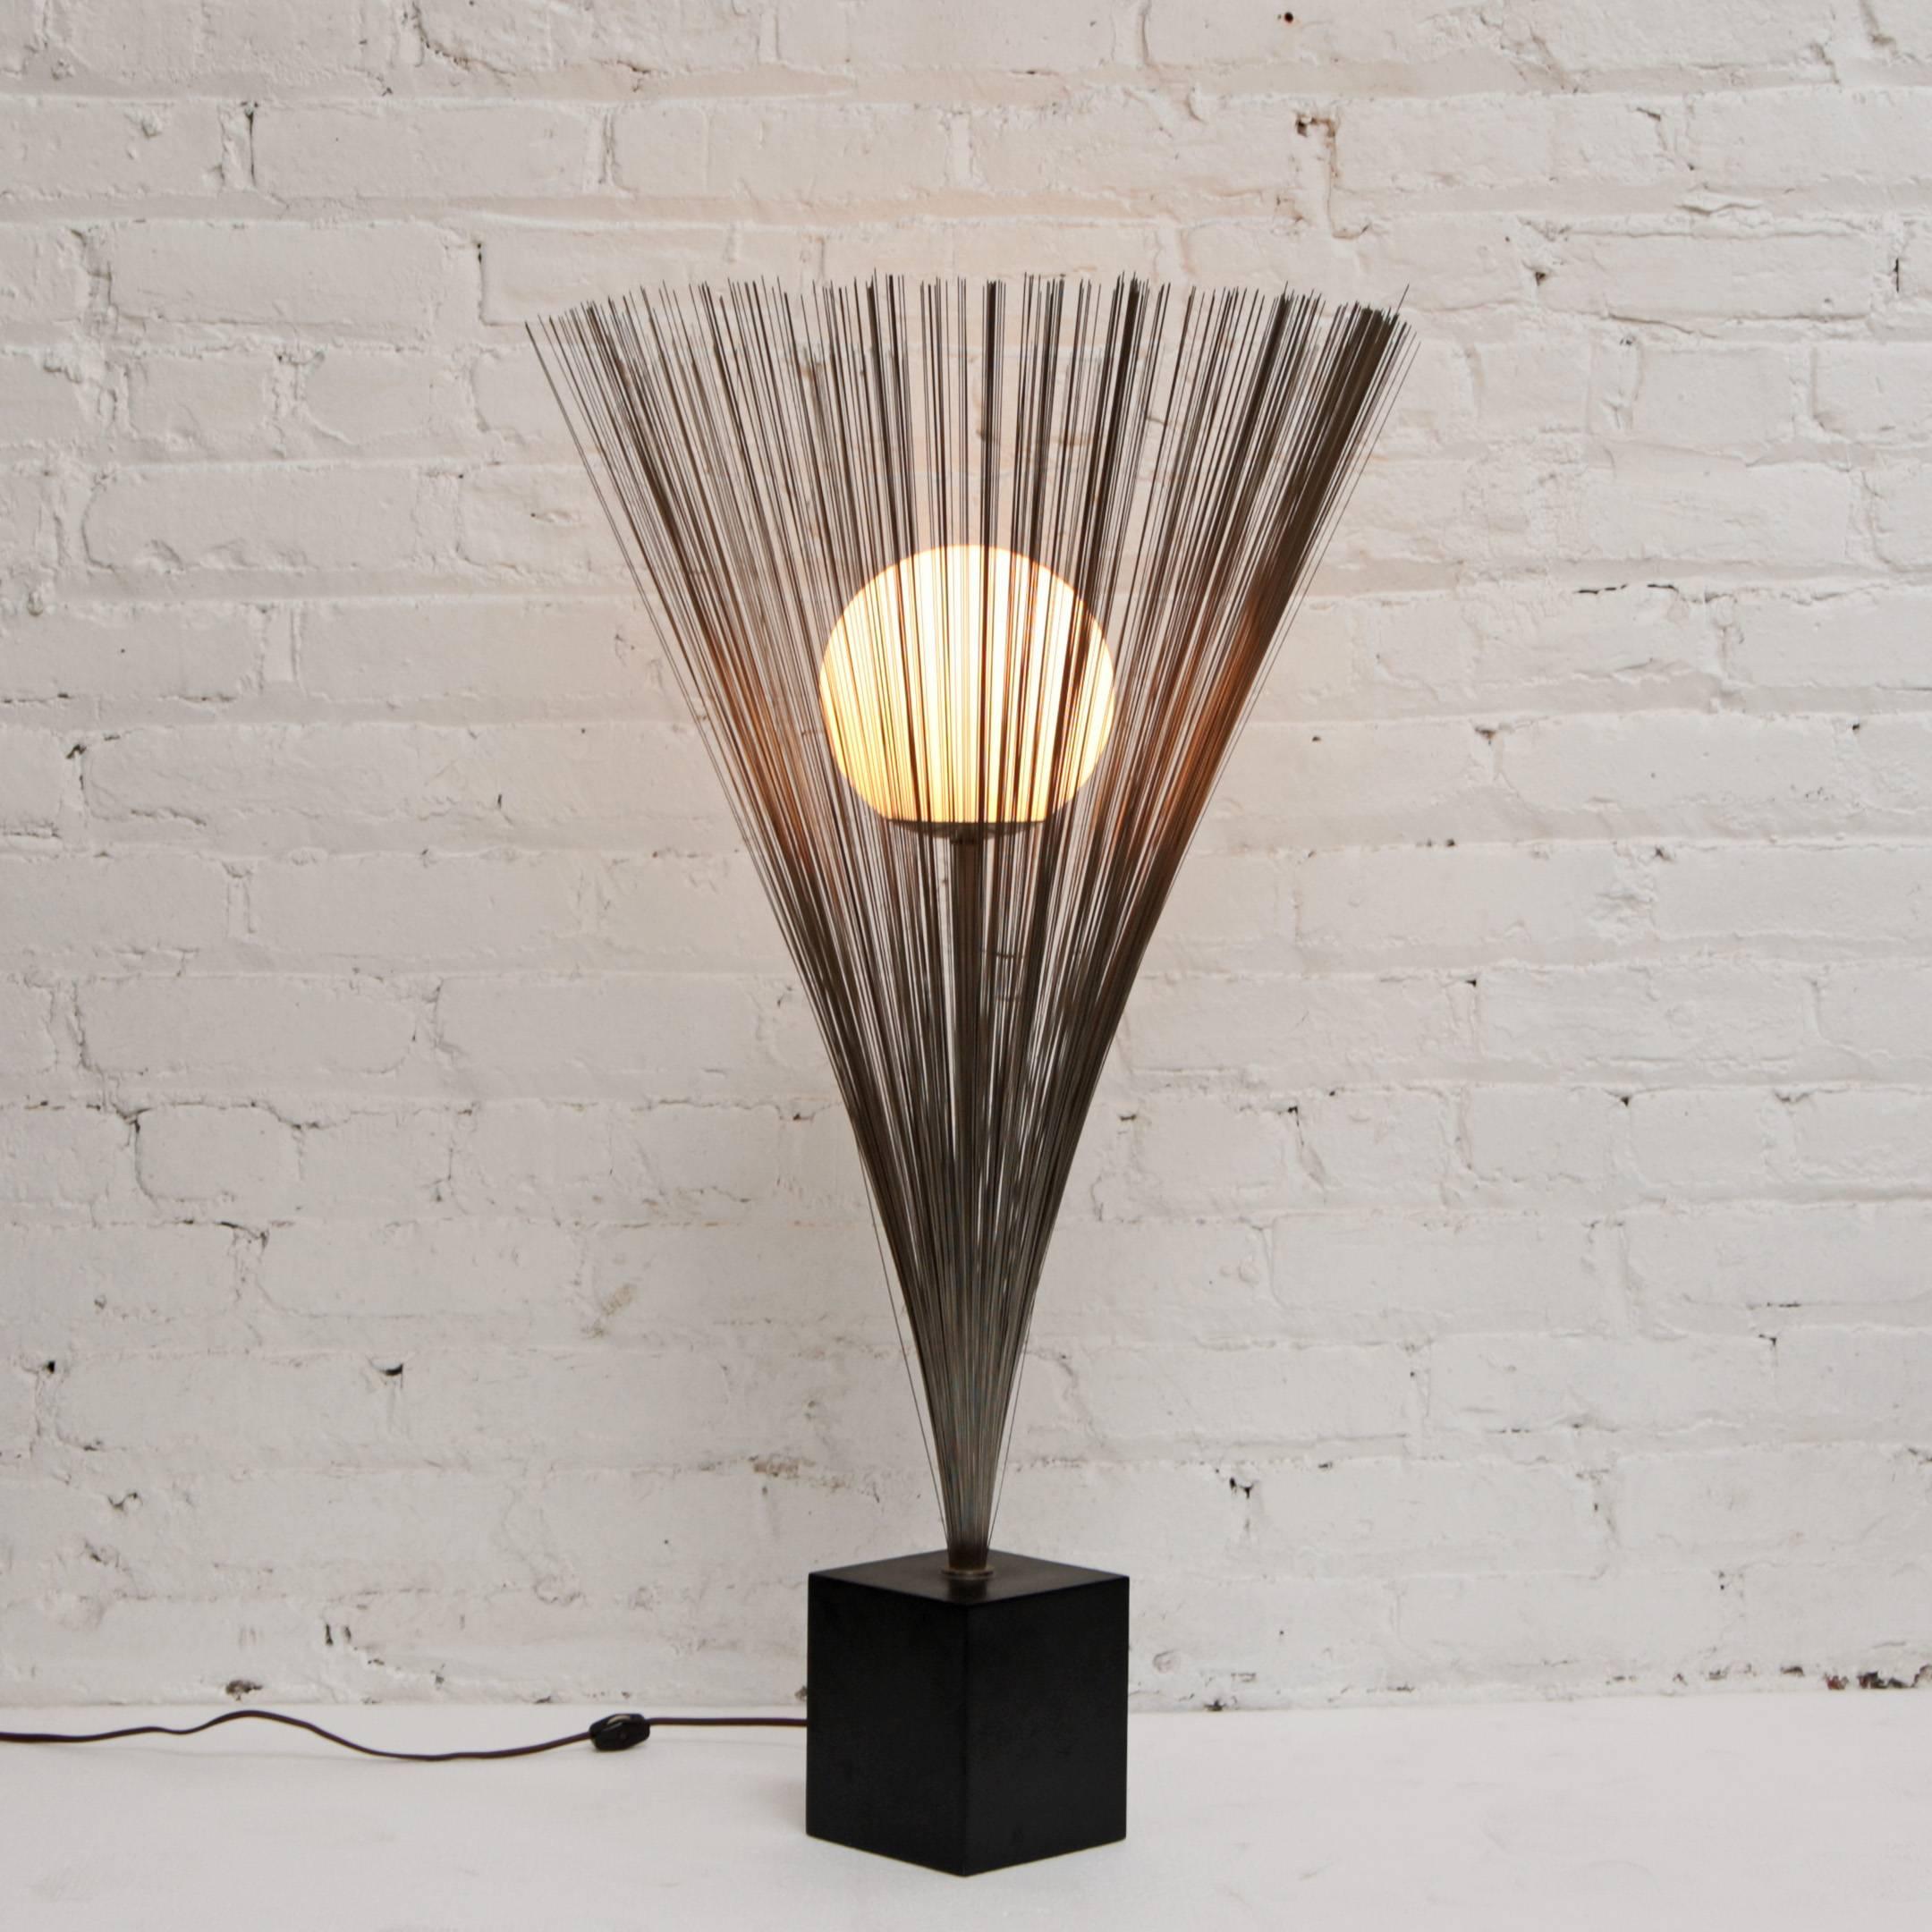 Mid-Century Modern table lamp by Laurel. In the style of Bertoia's spray sculptures. Metal wire encircles a glass globe.